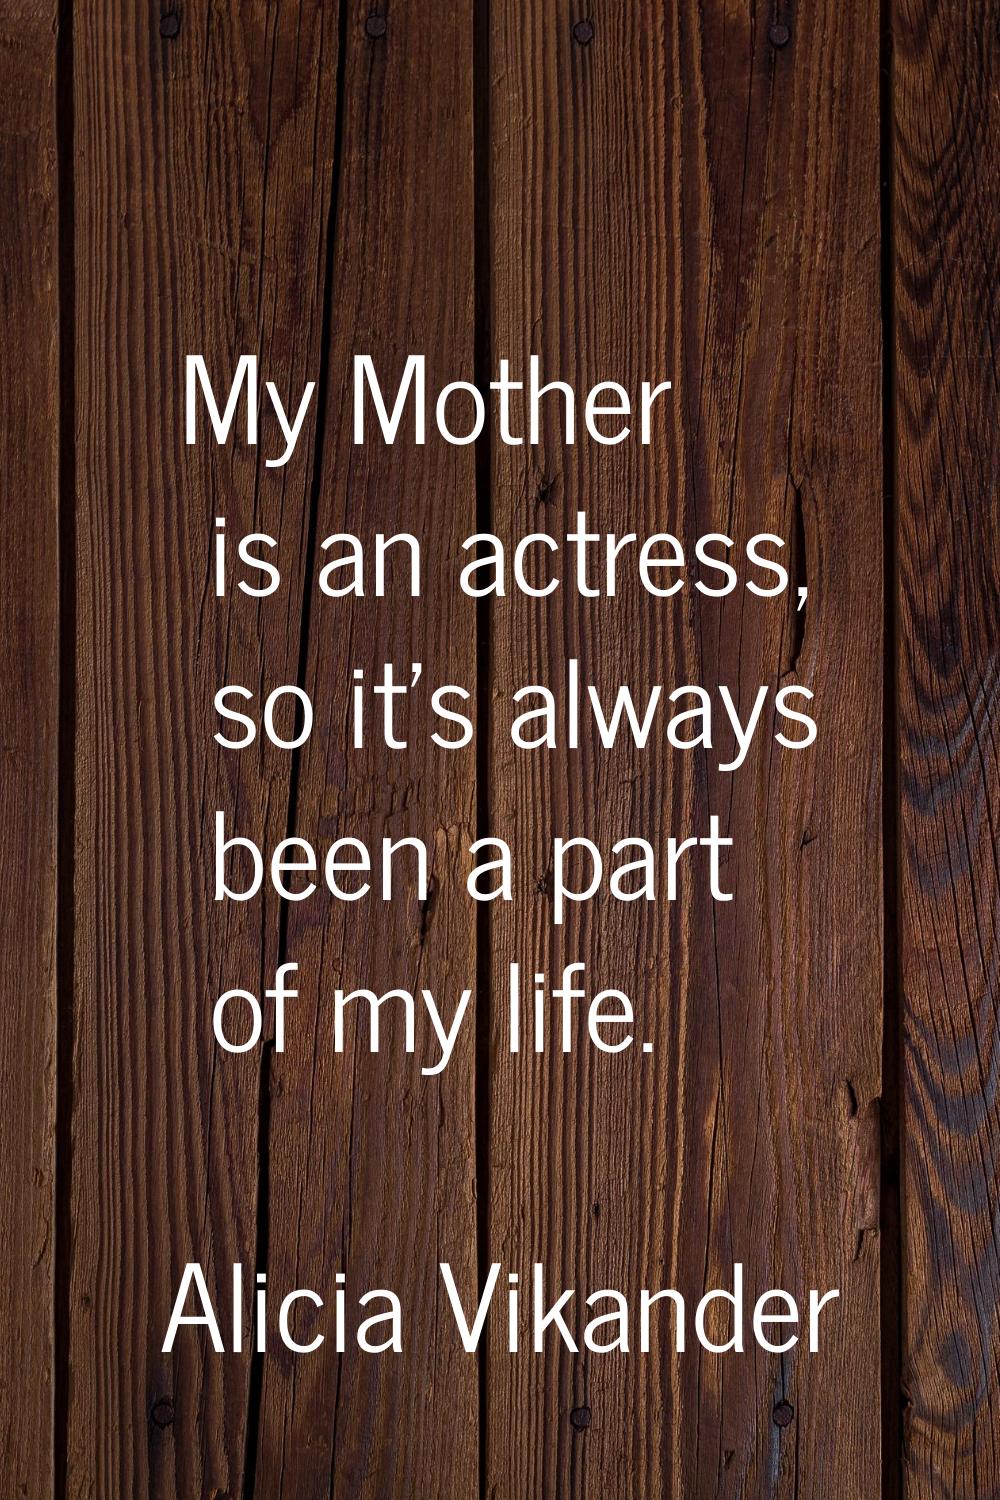 My Mother is an actress, so it's always been a part of my life.